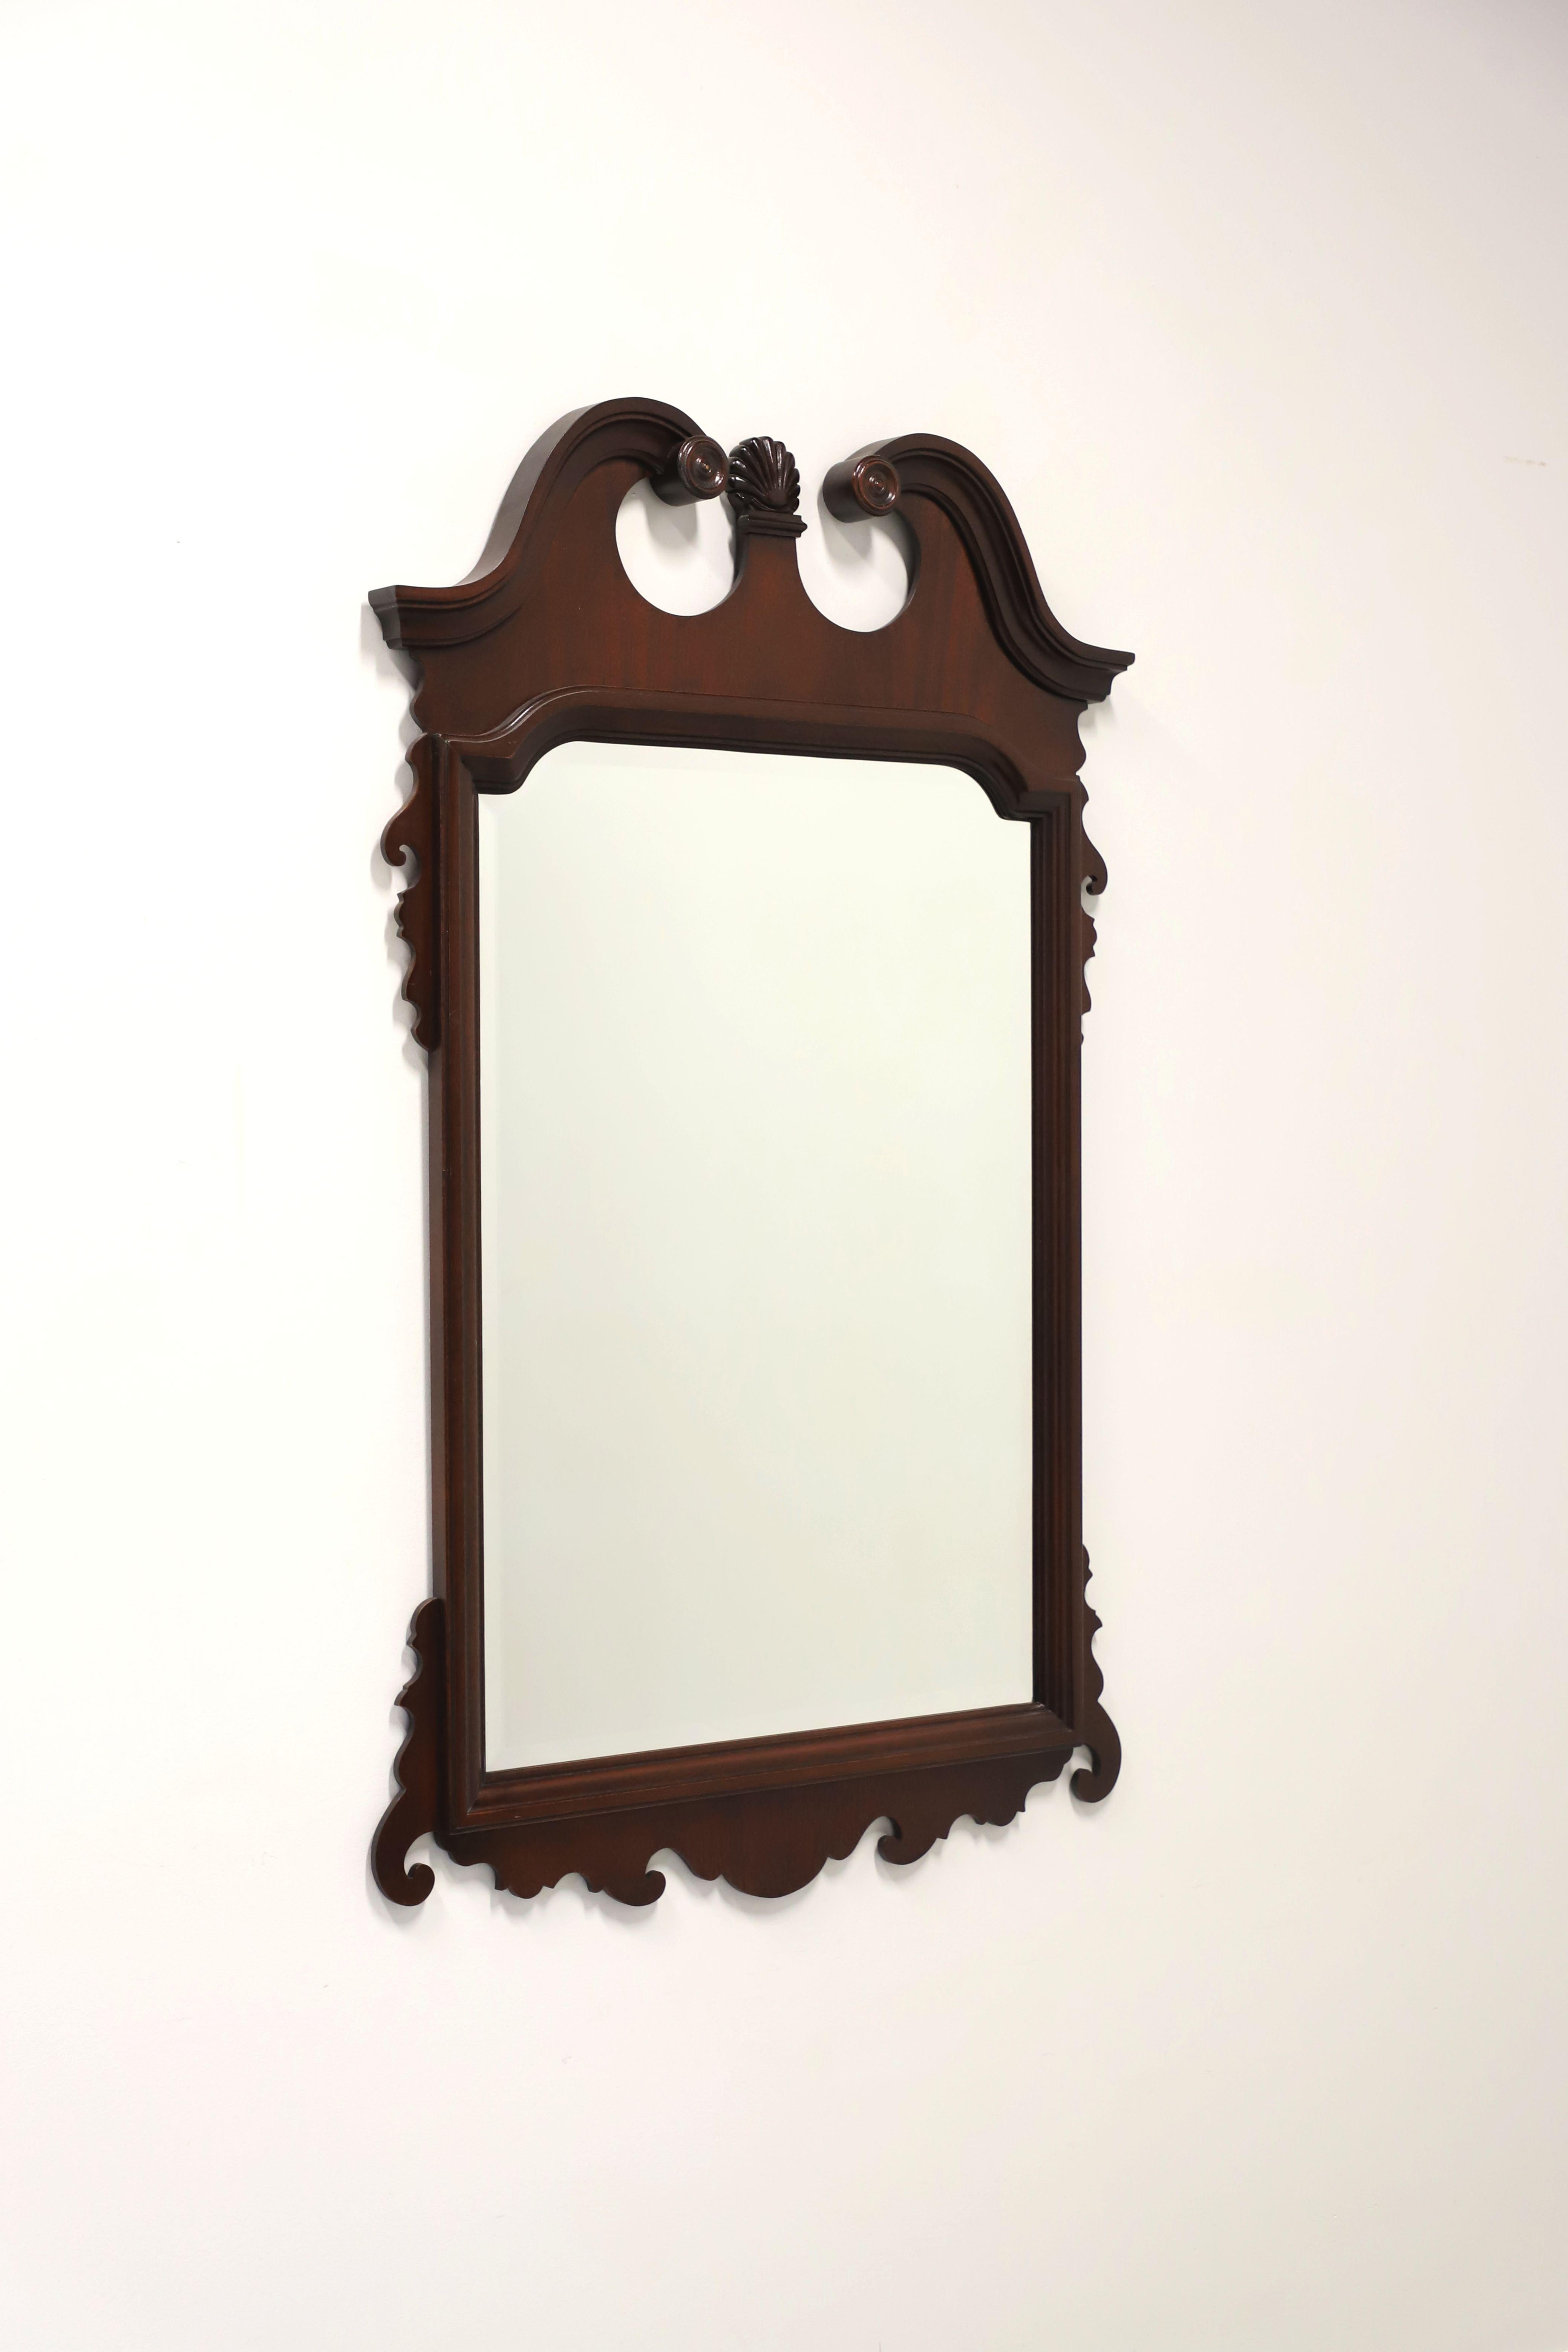 A Chippendale style wall mirror made by Link-Taylor, from their Heirloom Gallery. Beveled mirrored glass in a solid mahogany frame, decoratively carved, and a broken arch top with center medallion. Made in Lexington, North Carolina, USA, circa